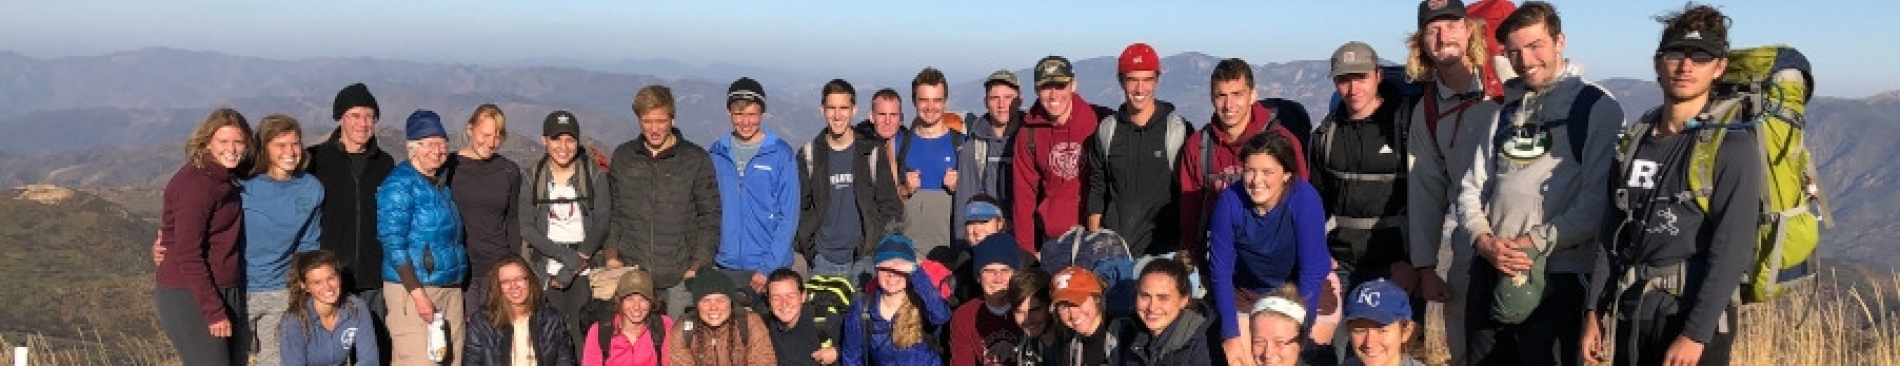 Slideshow: Fr. Paul Leads Students on Backpacking Trip to To